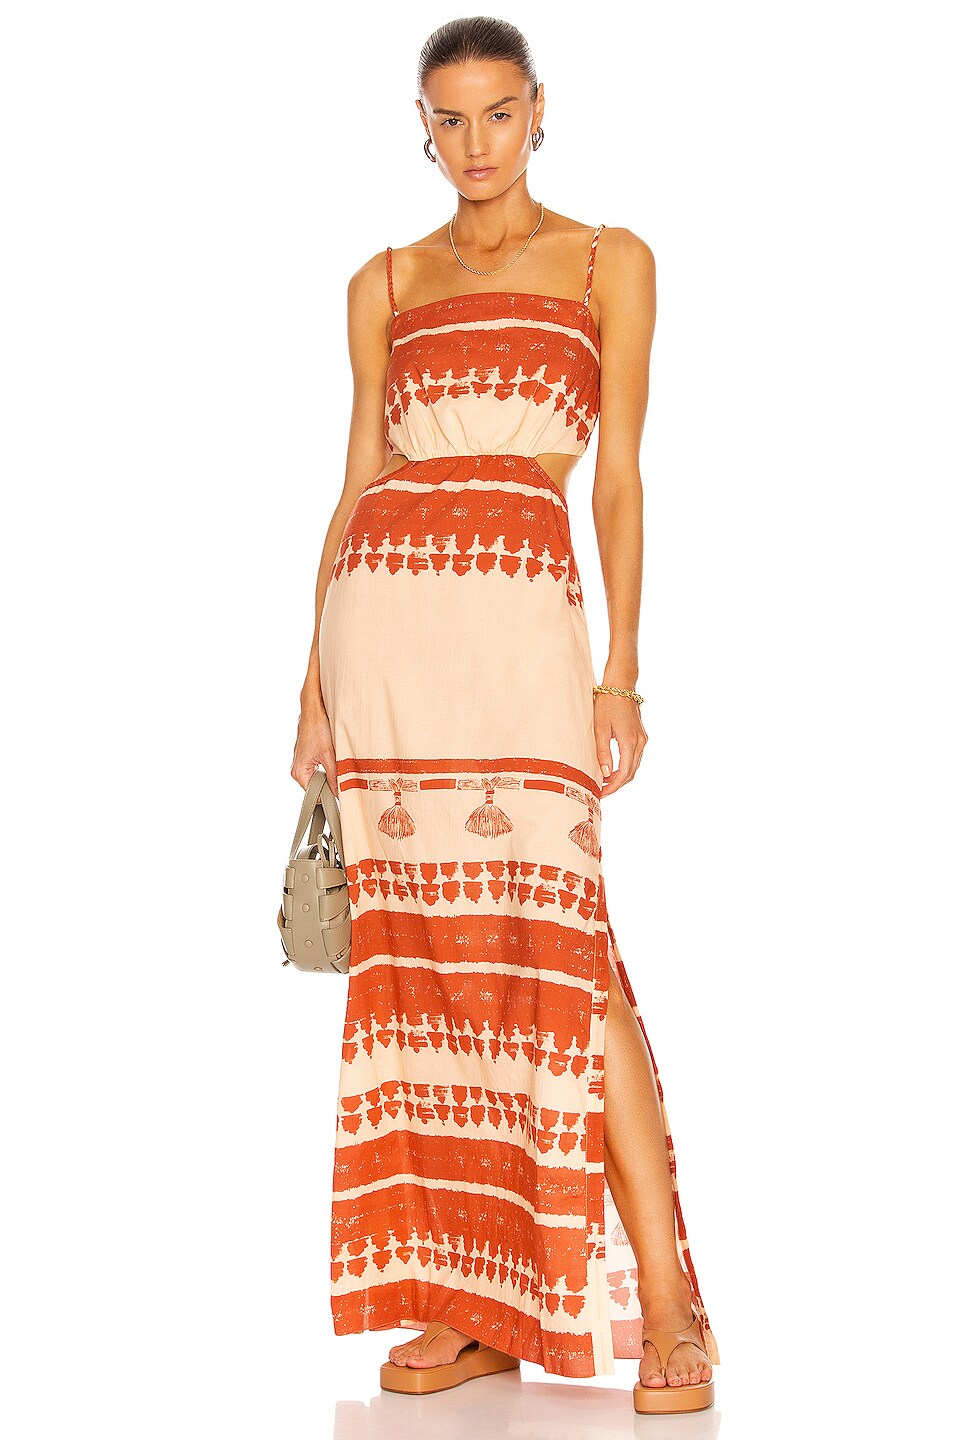 Image 1 of Johanna Ortiz Intangible Culture Maxi Dress in Facundo Beach Sand & Achiote Red